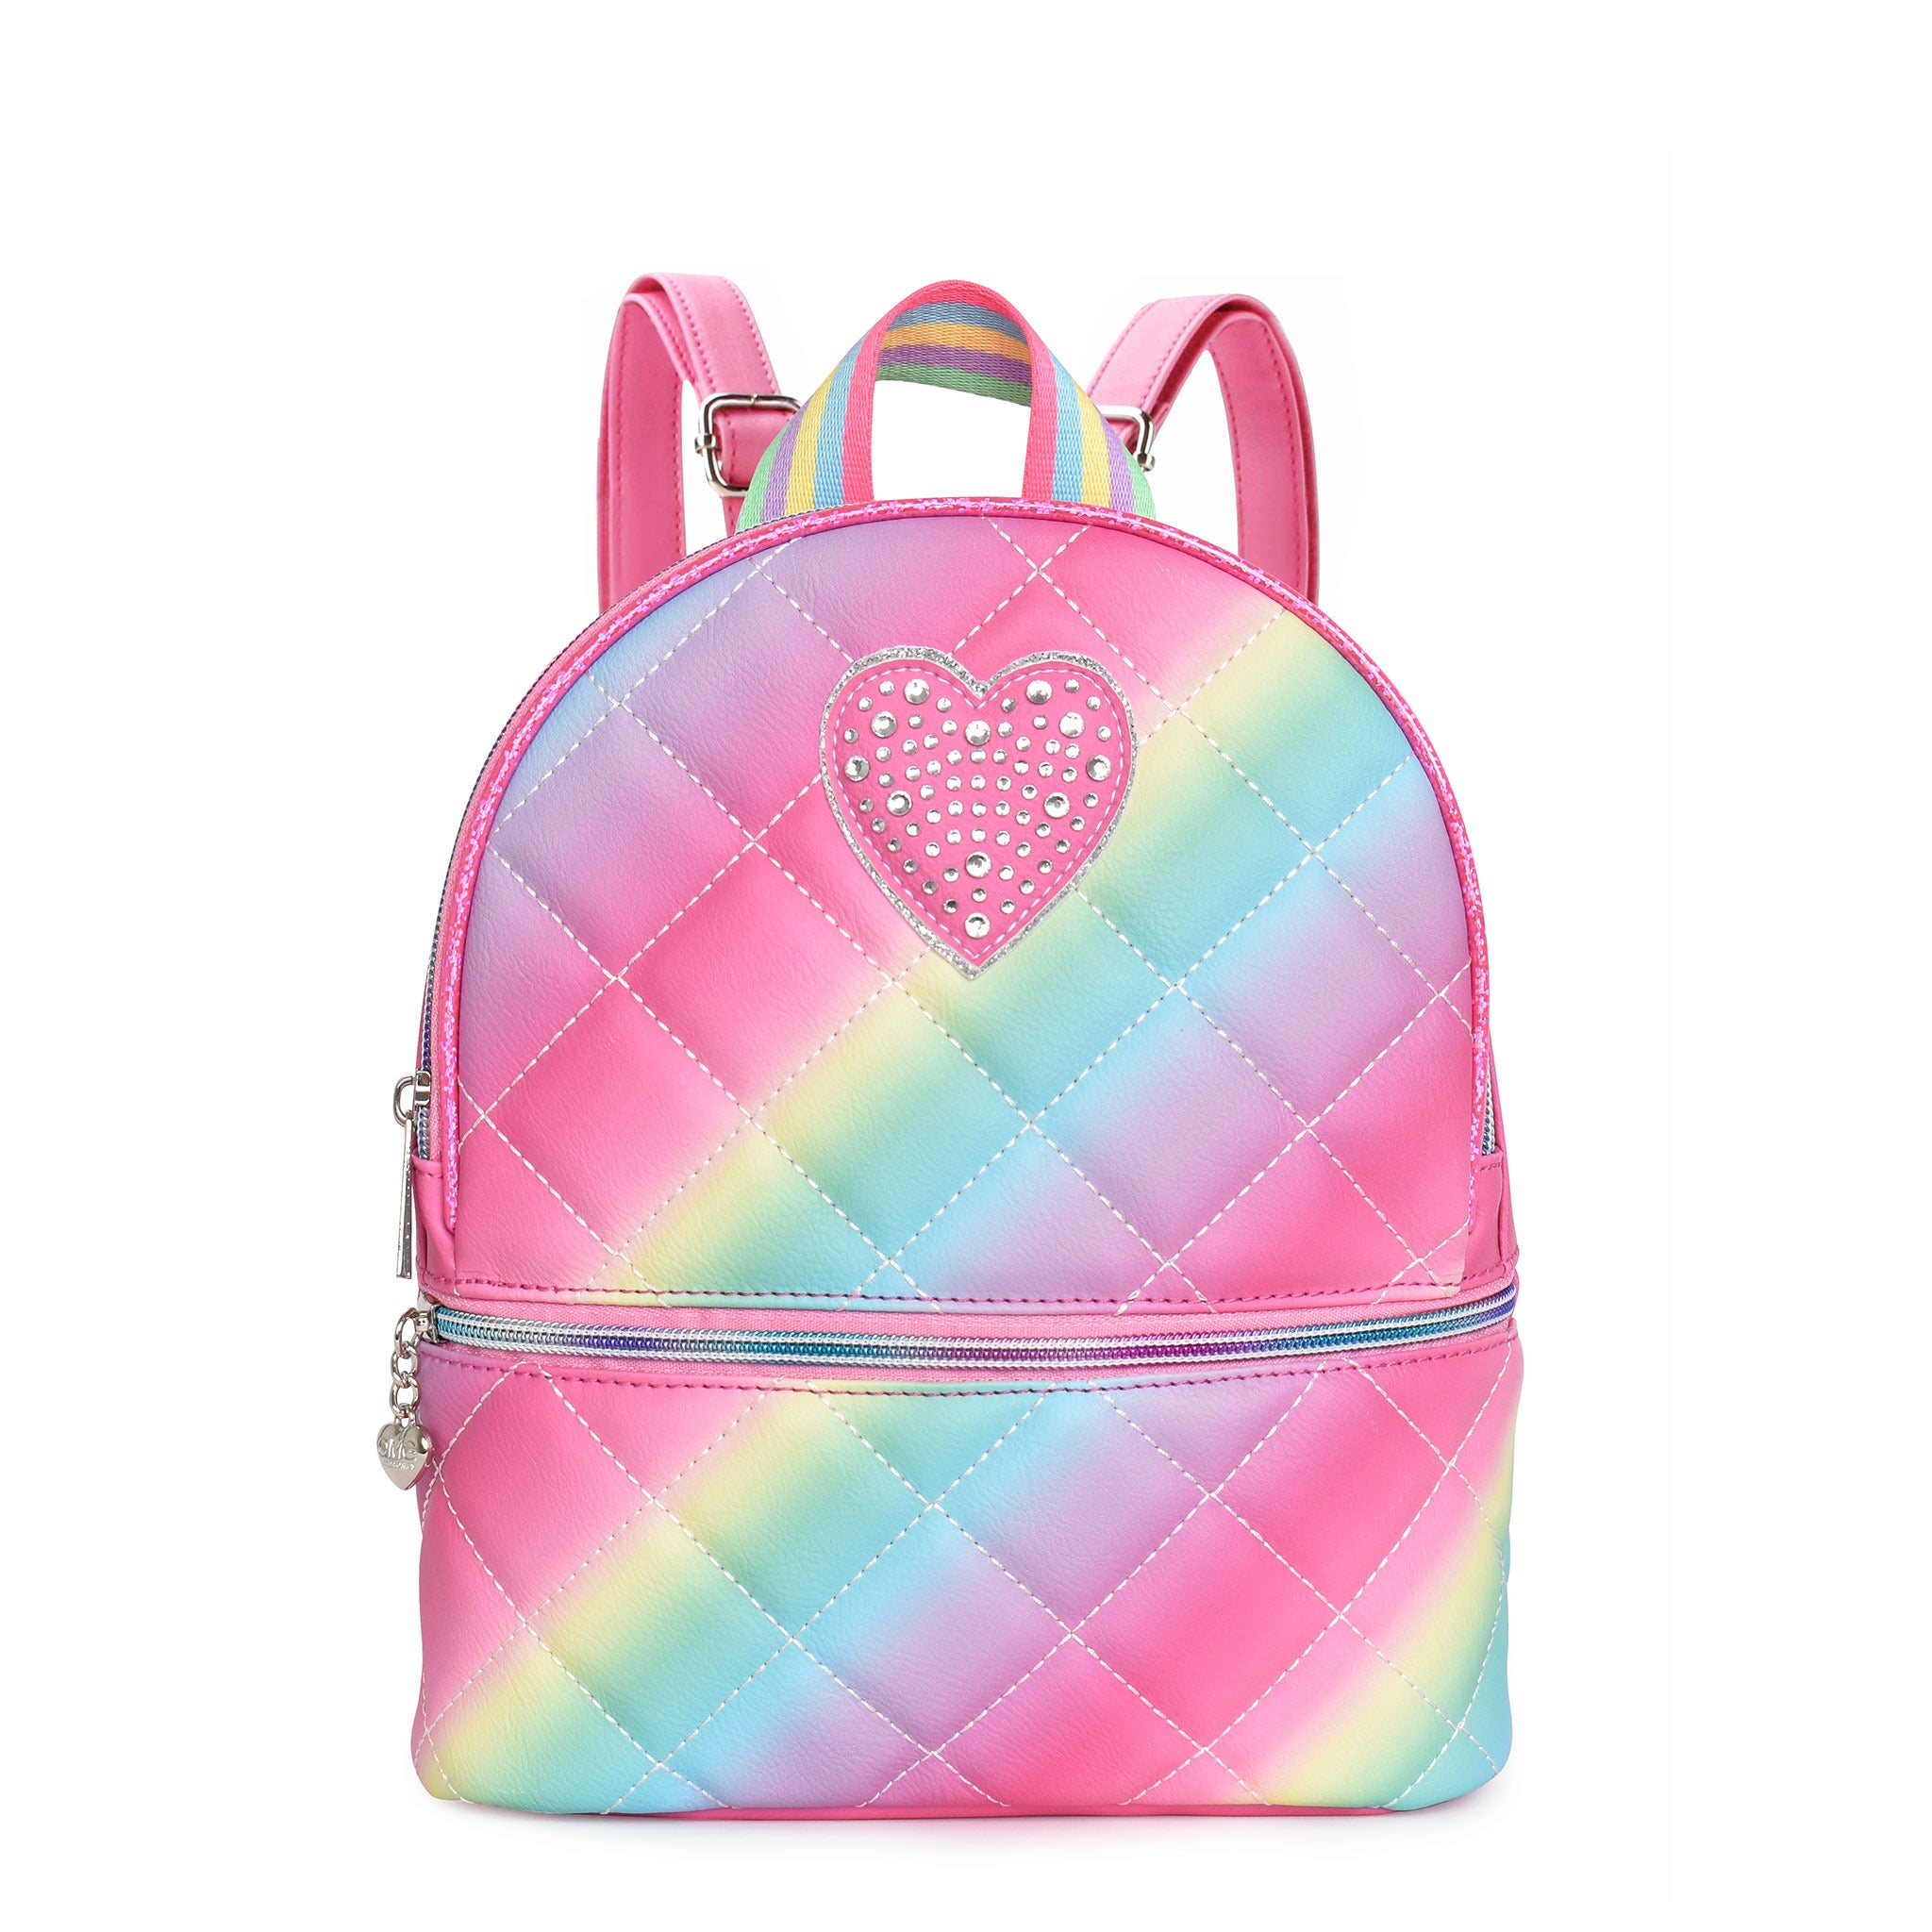 Front view of a rainbow ombre quilted mini backpack with a rhinestone heart appliqué 